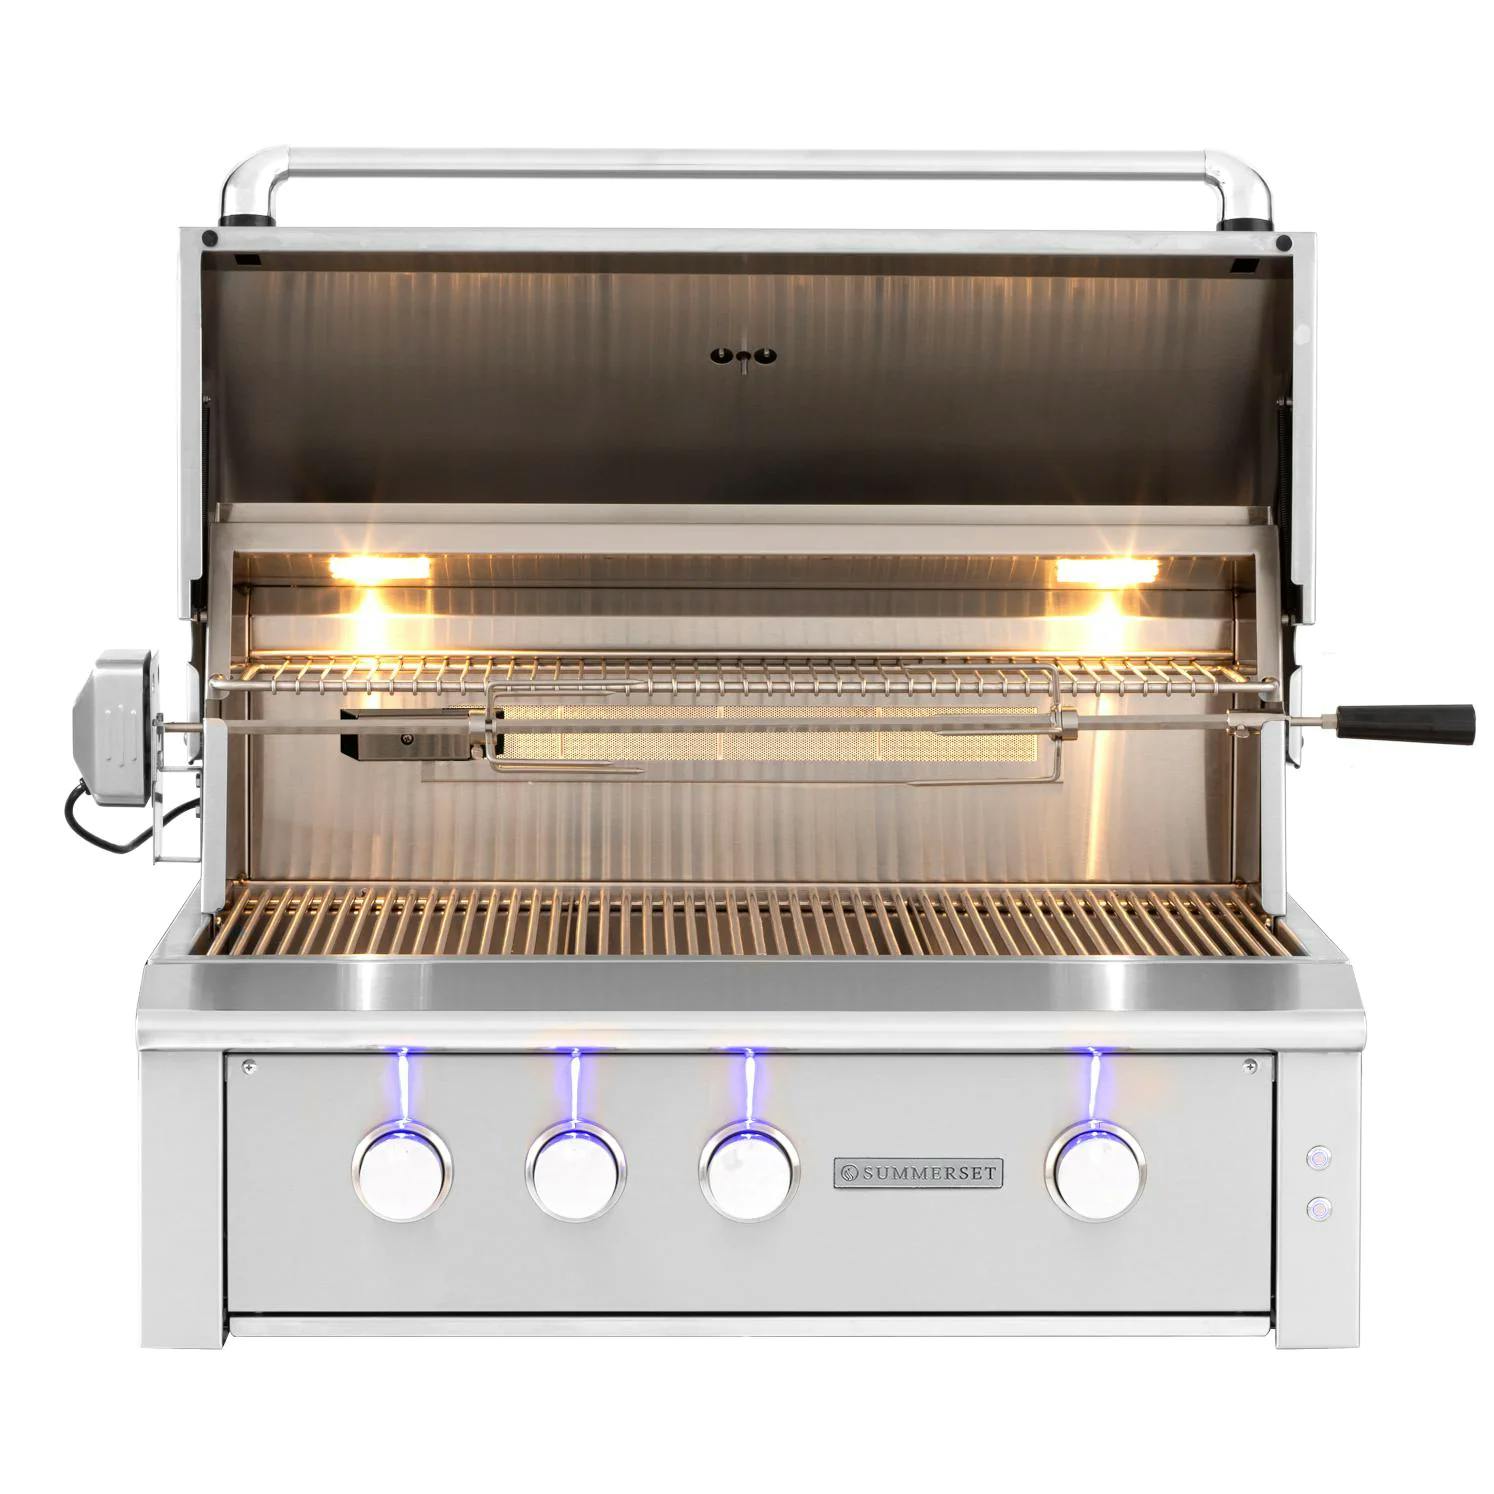 Summerset Alturi 3-Burner Built-In Gas Grill with Stainless Steel Burners and Rotisserie · 36 in. · Natural